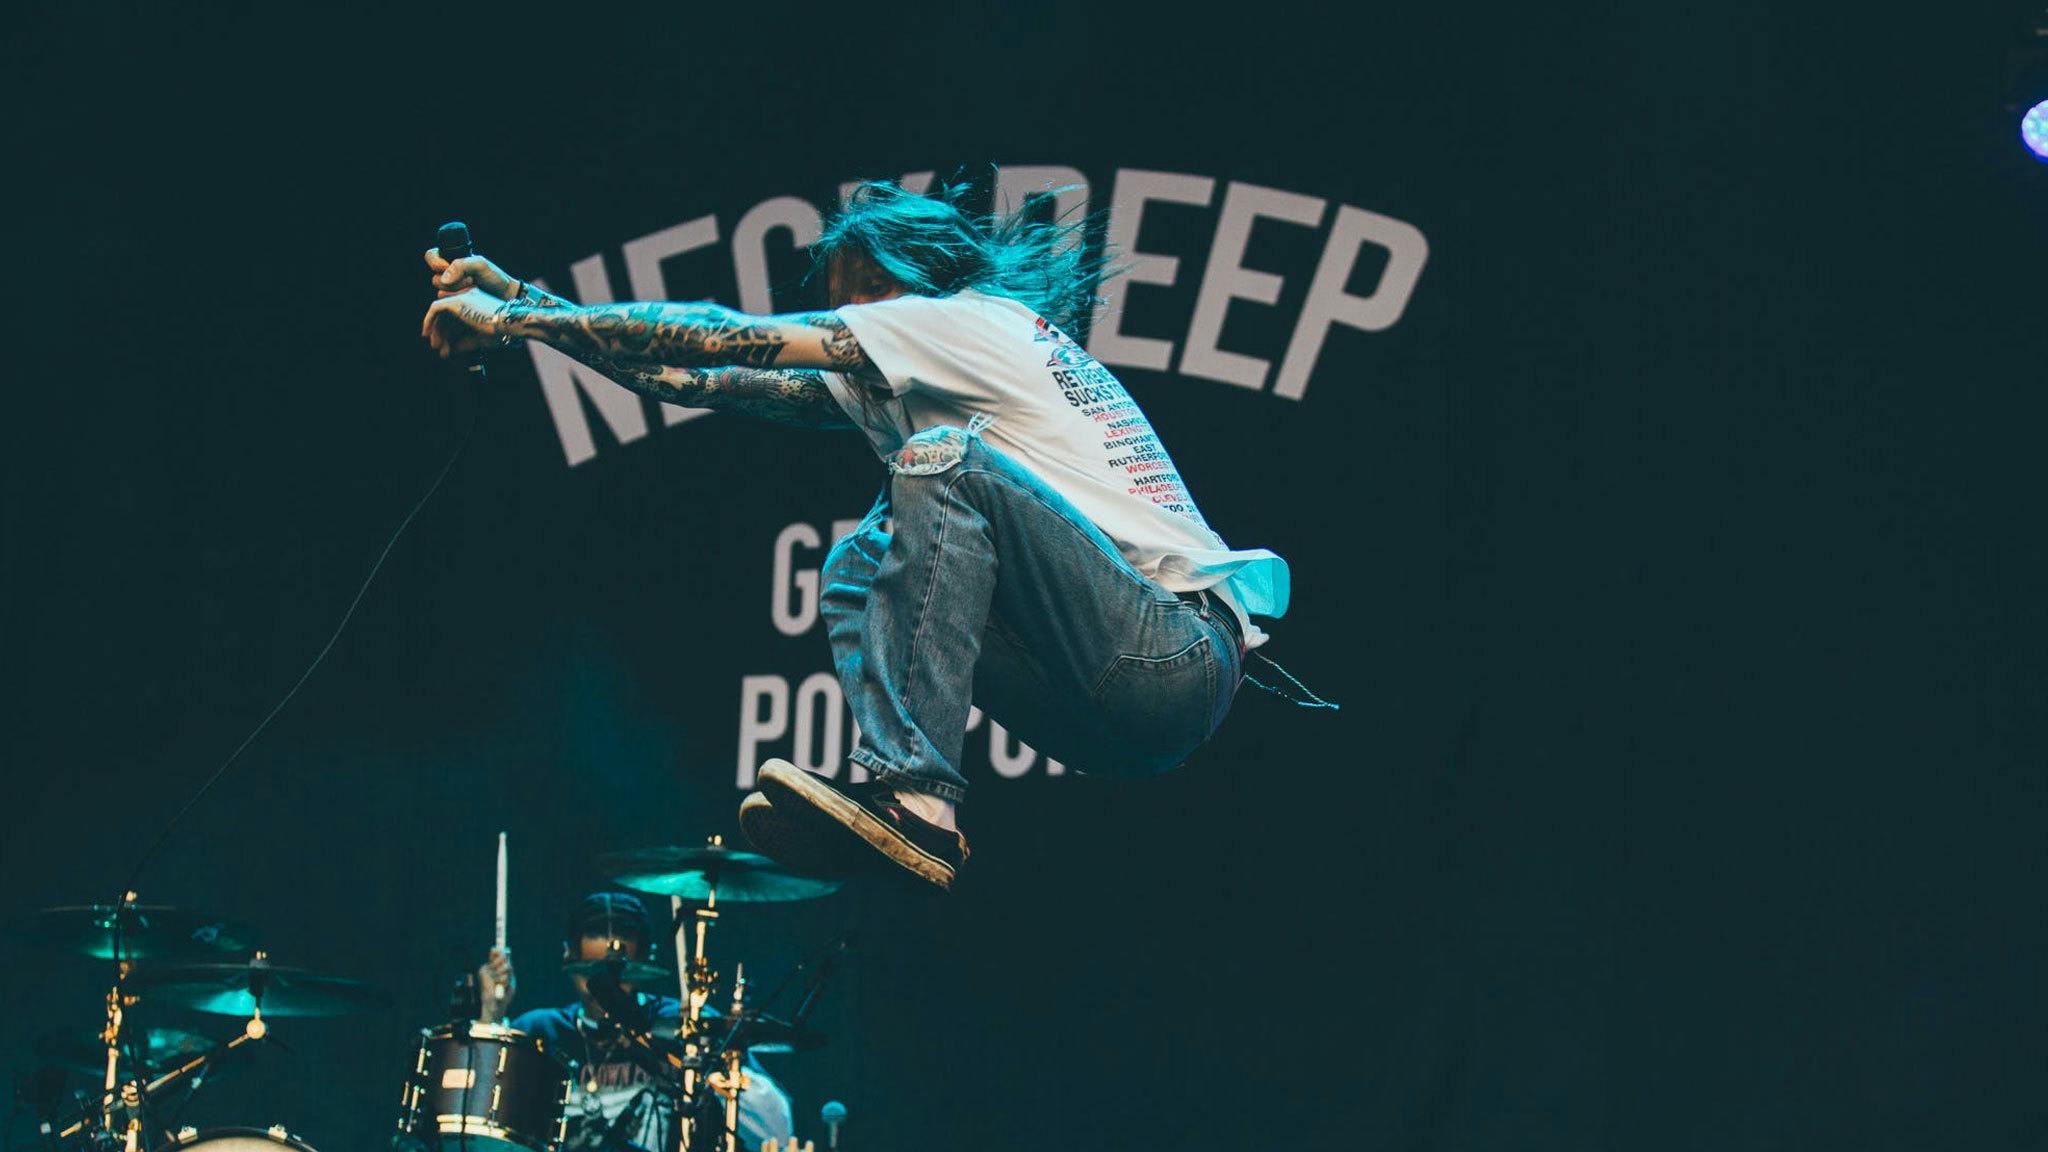 Neck Deep talk new music: “It’s about not overthinking it too much, and keeping being ourselves”